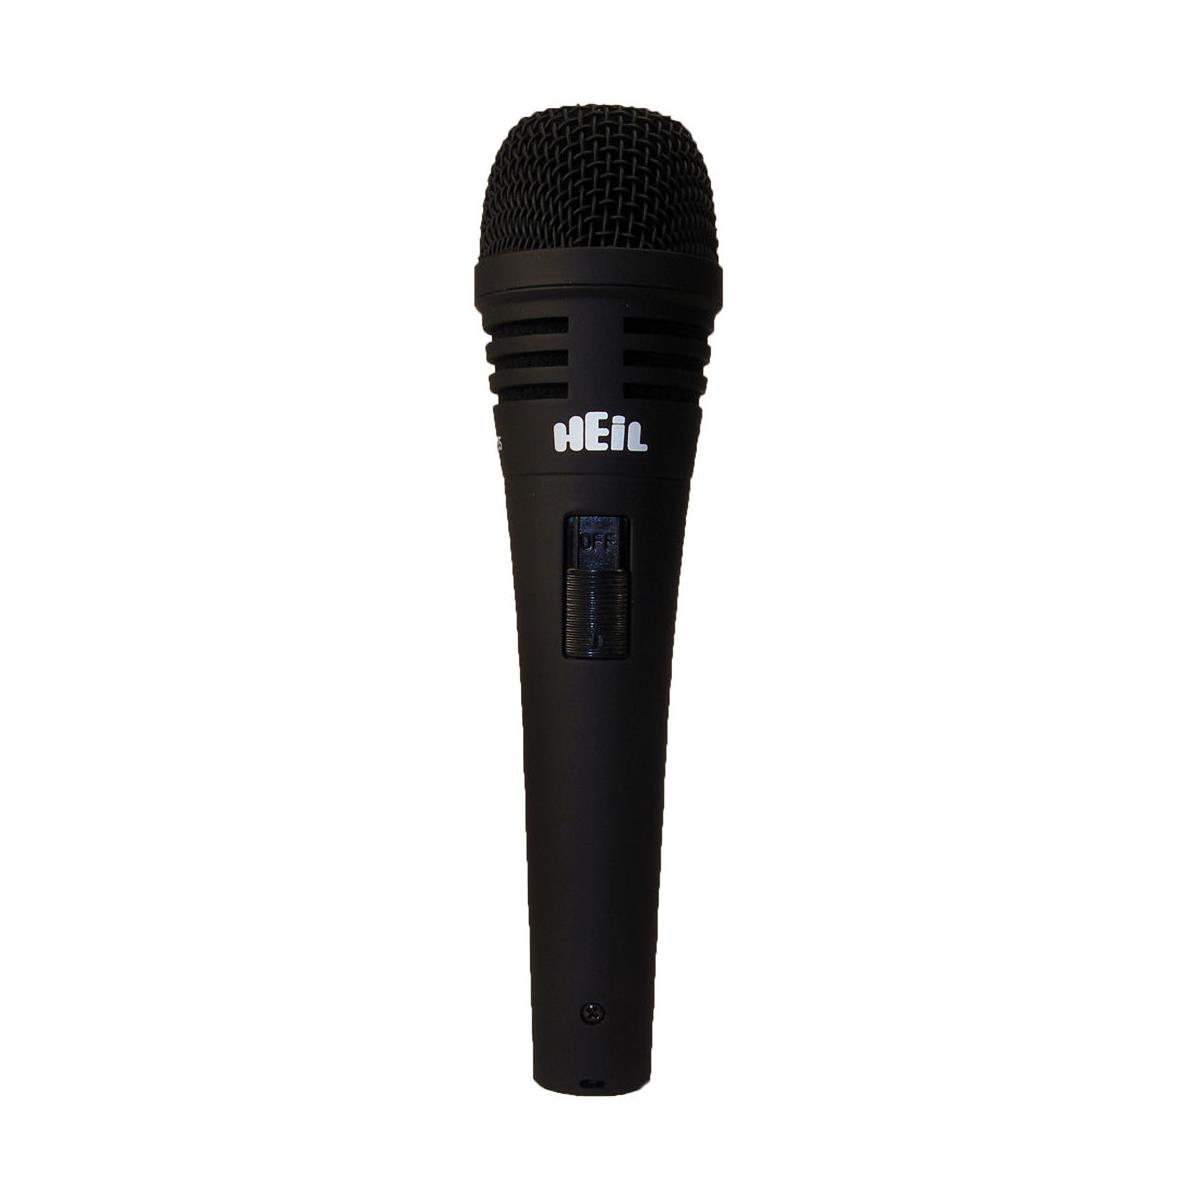 Heil Sound PR 35 Large Diameter Cardioid Handheld Microphone with On/Off Switch -  PR35S